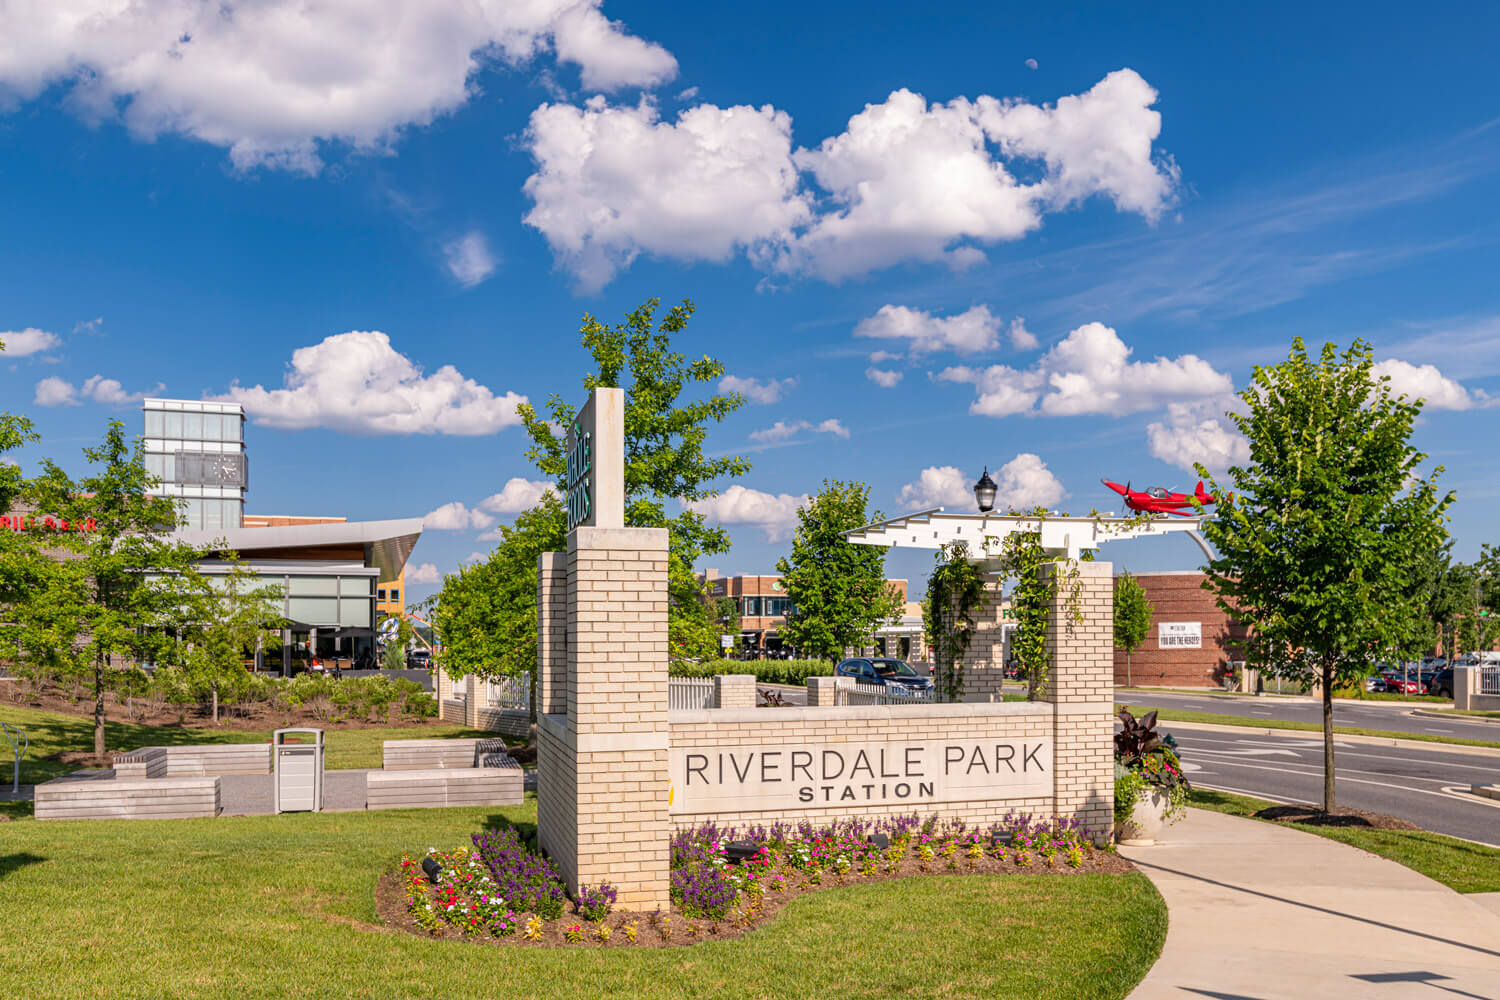 Welcome to Riverdale Park